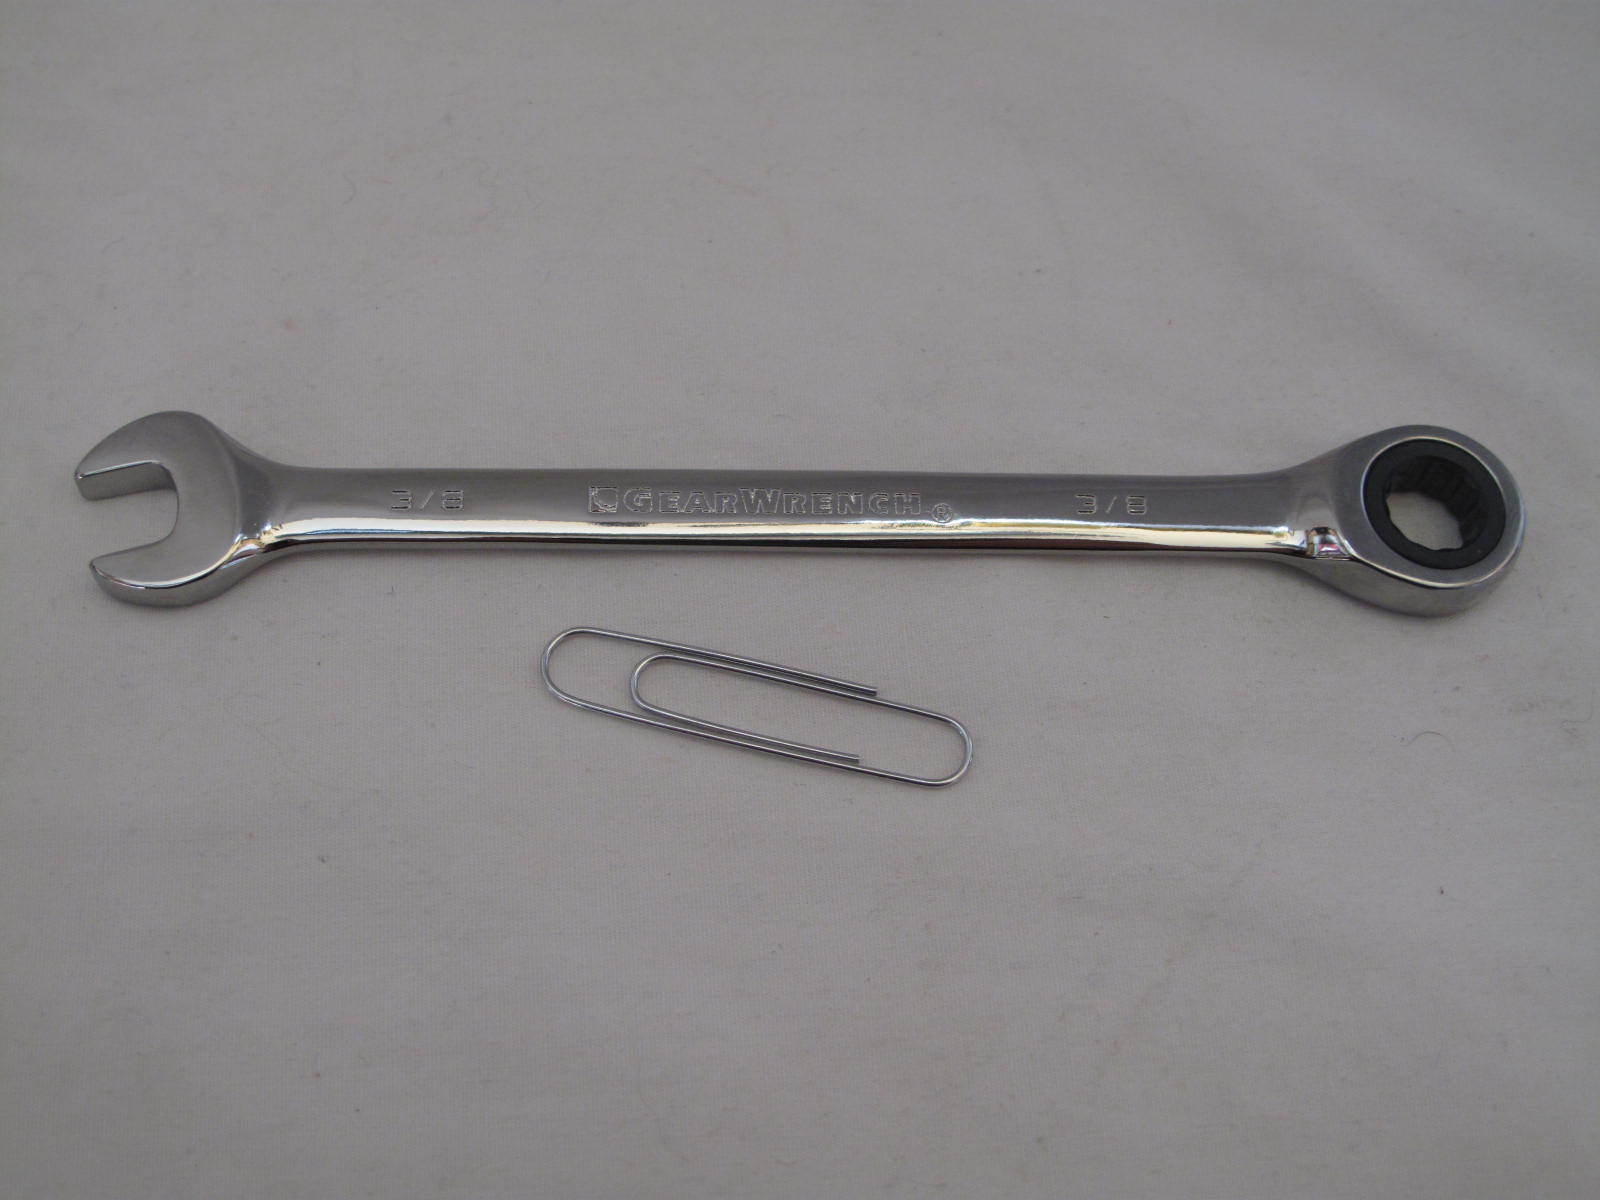 (1) New Gearwrench 3/8" Flat Ratcheting Open Box End Wrench Polished Chrome Gf